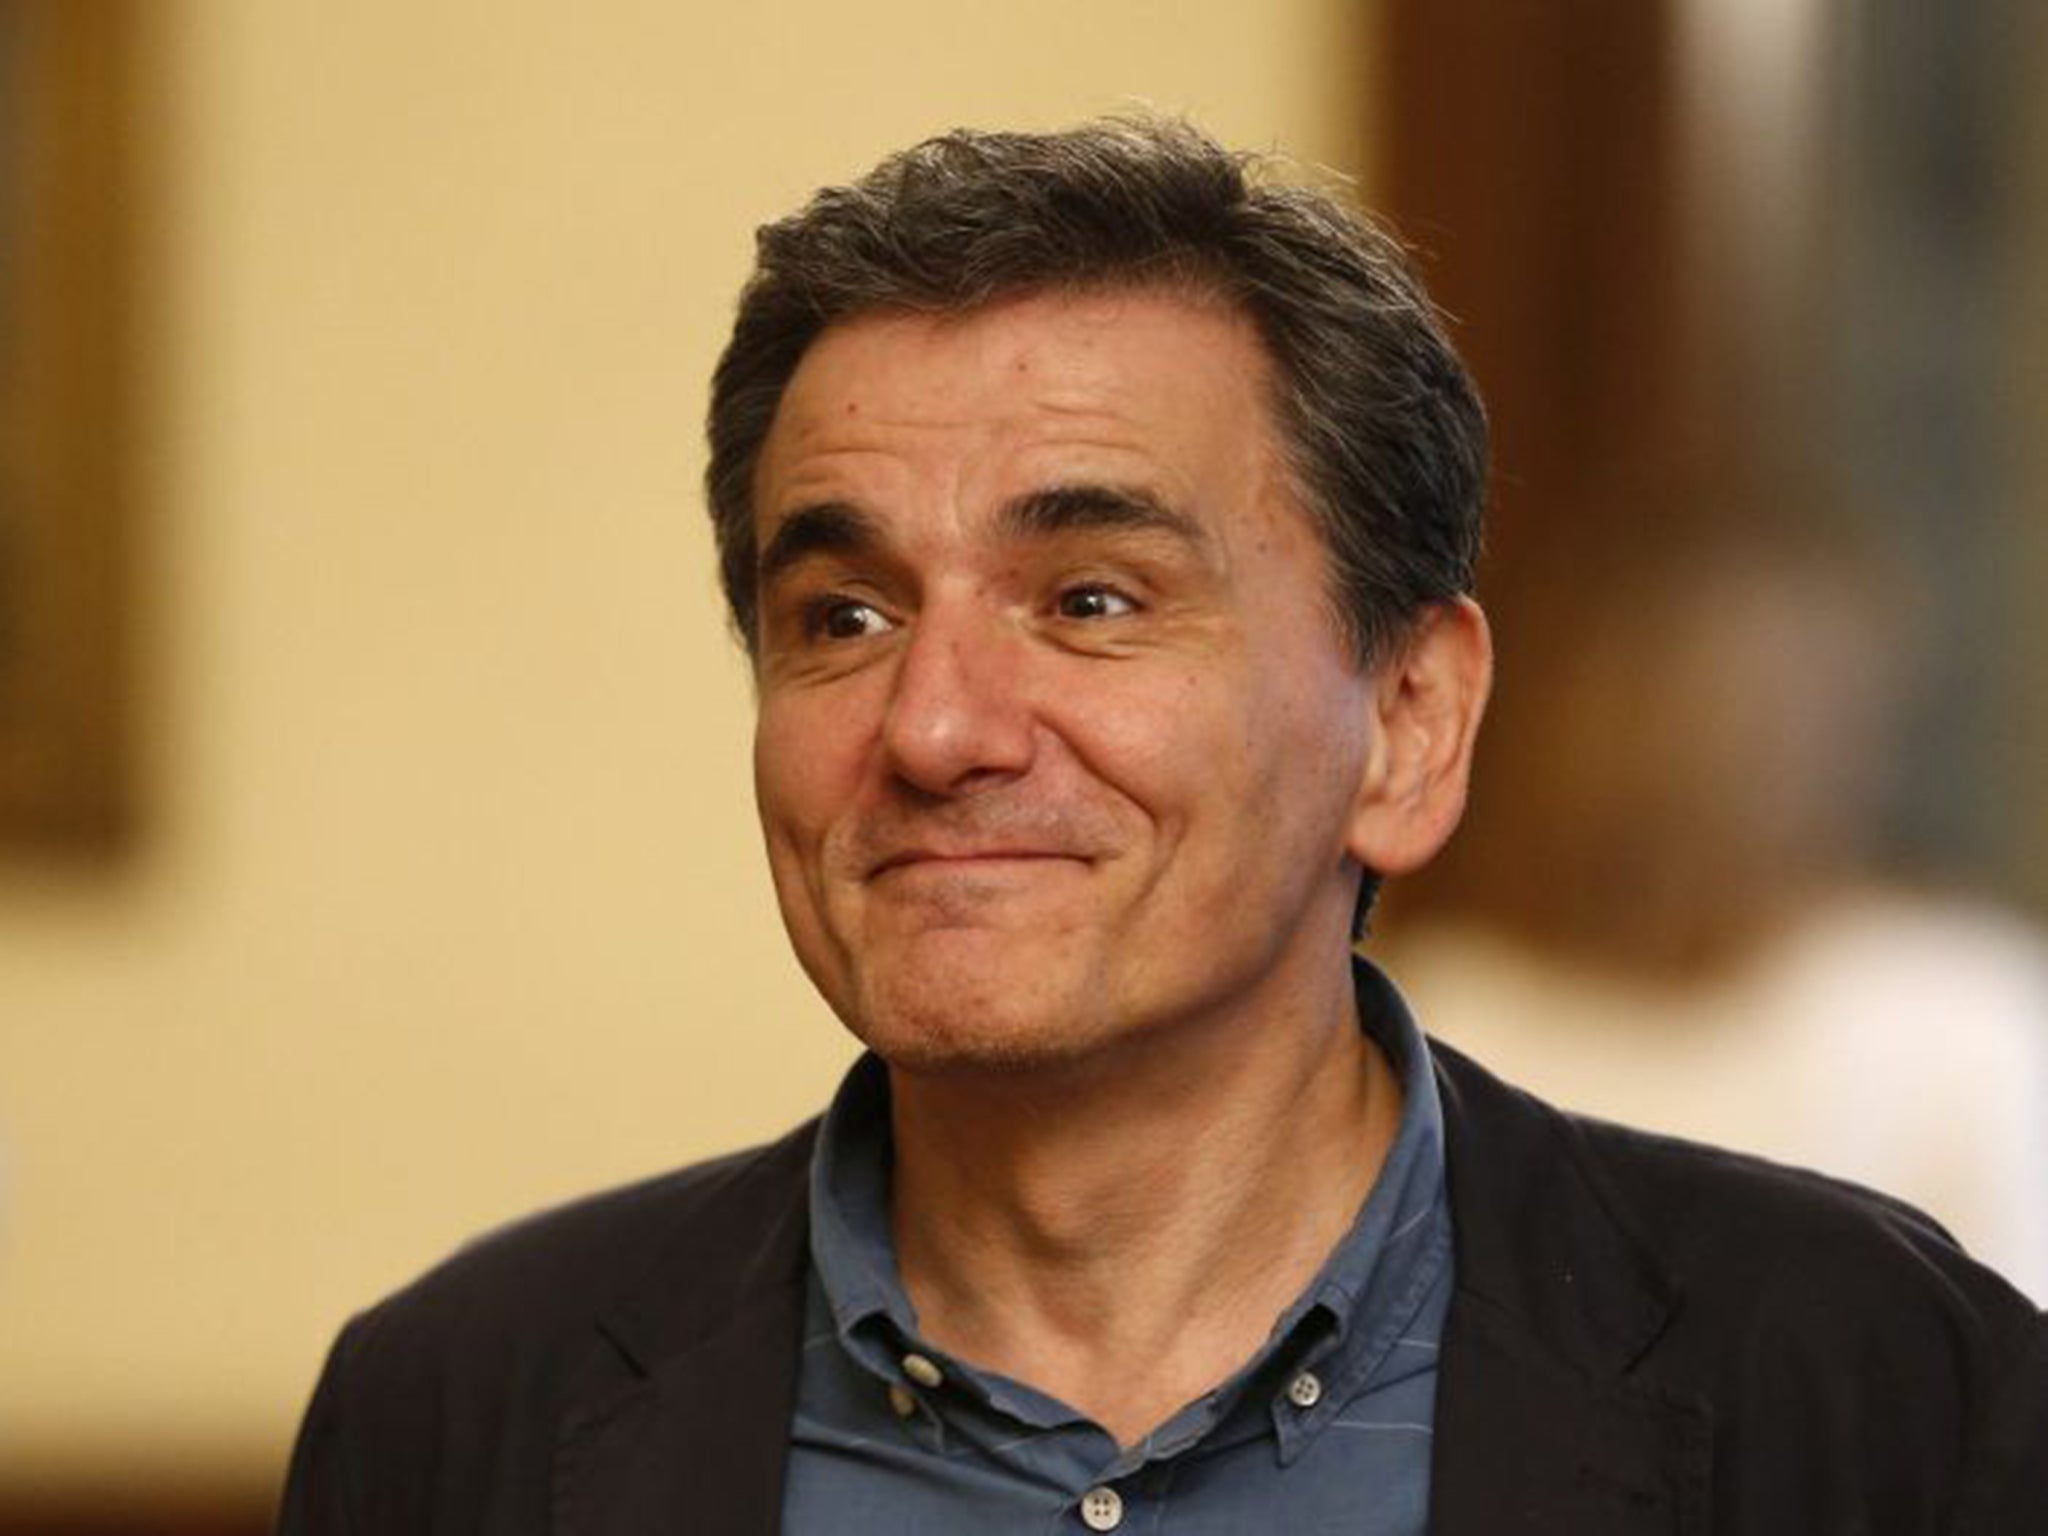 Euclid Tsakalotos has been a staunch left-wing Syriza supporter for years, serving as a member of the party’s central committee